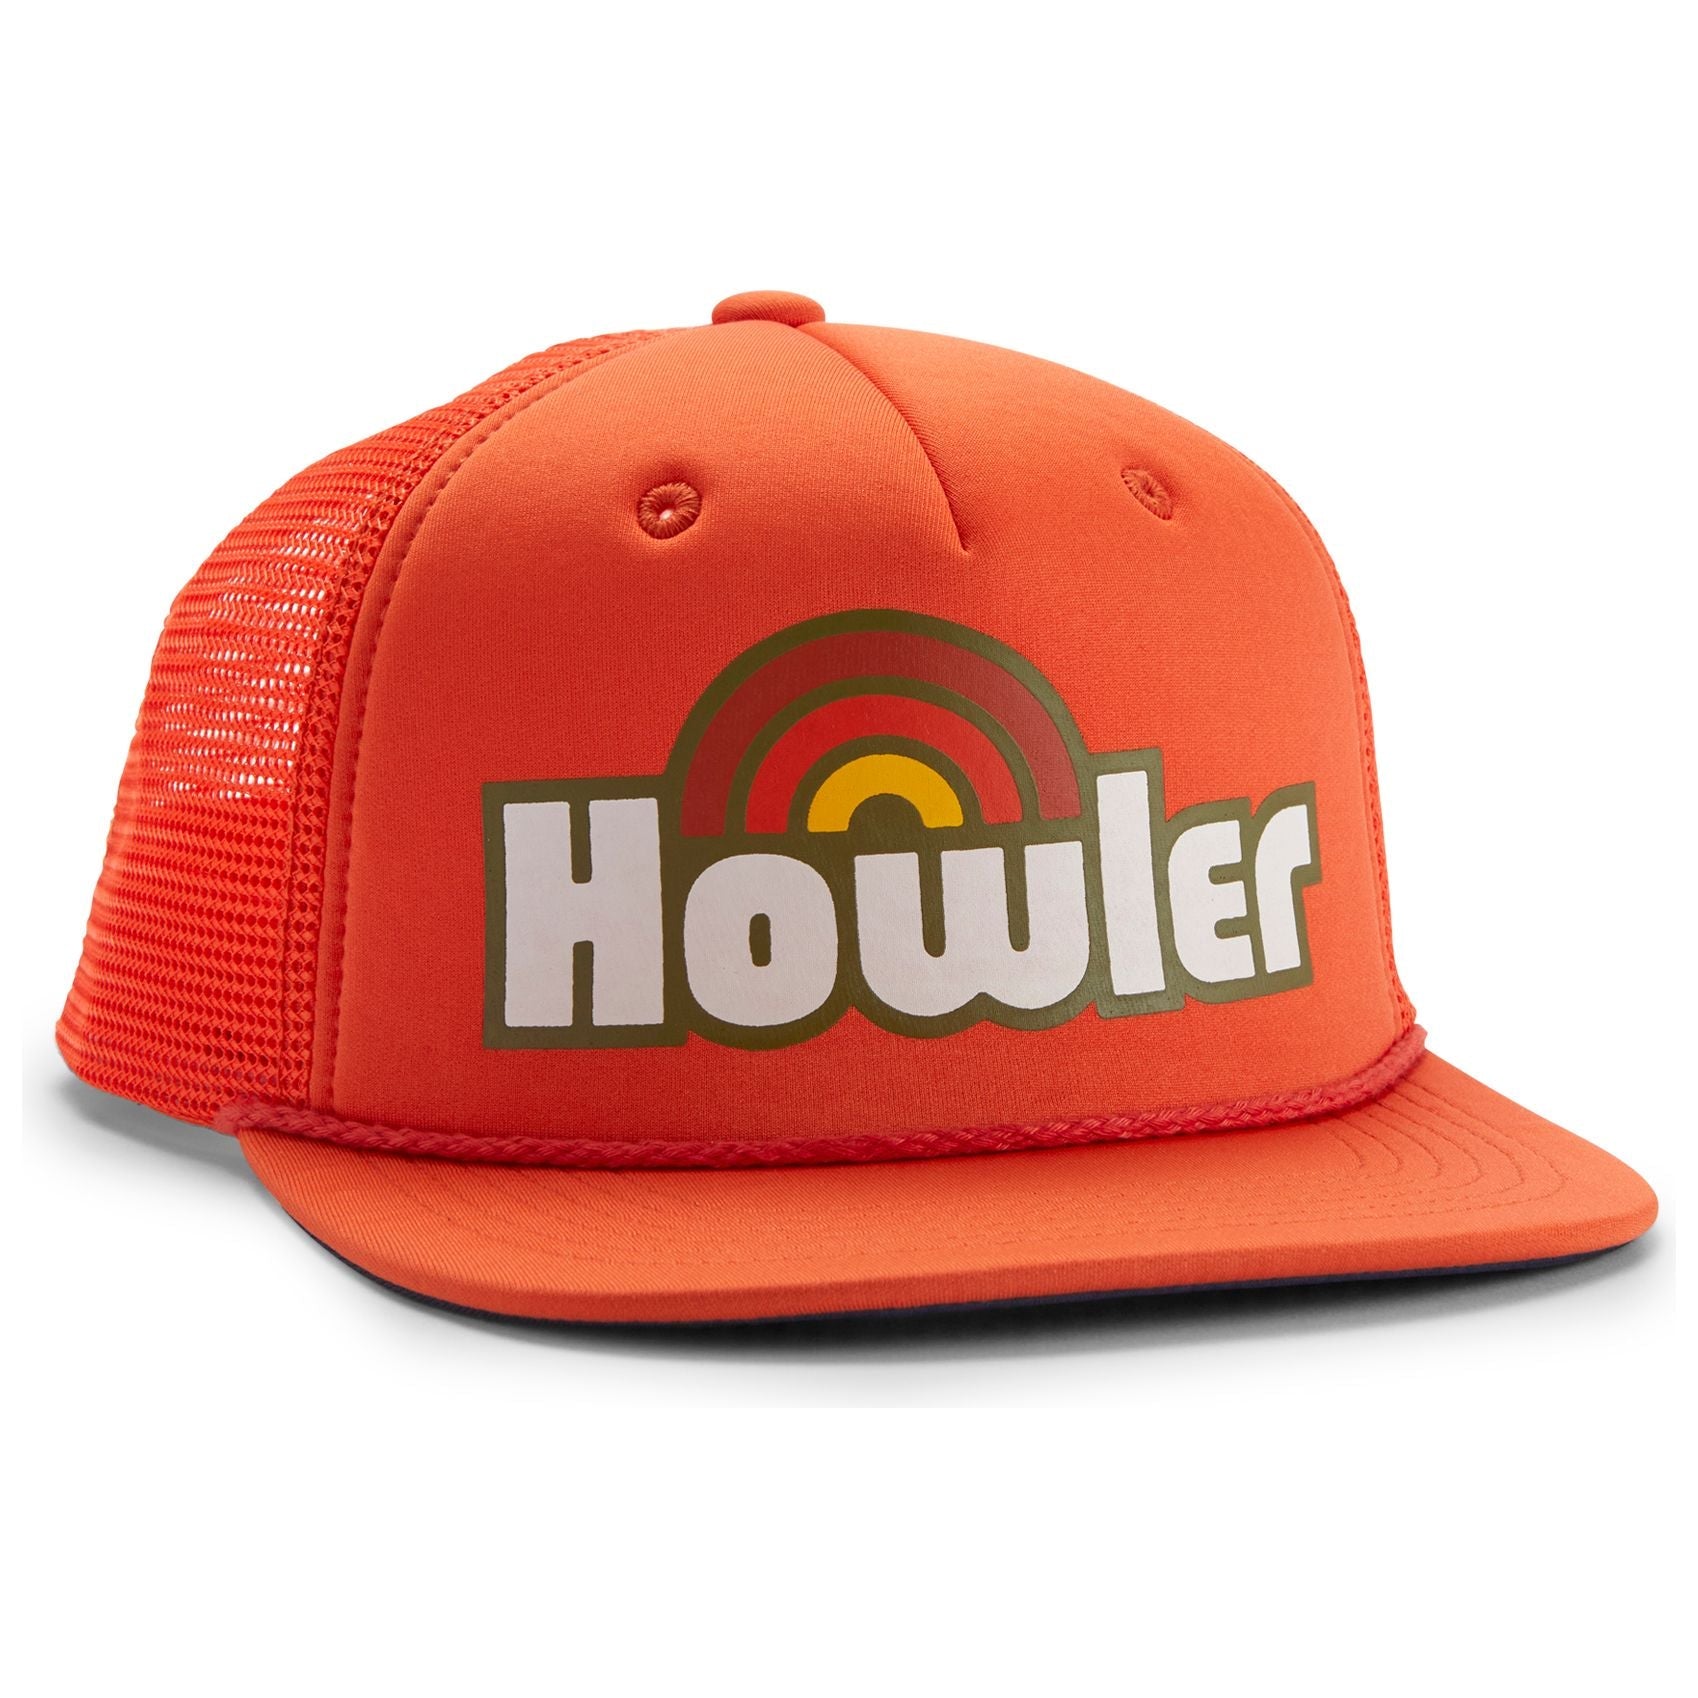 Howler Brothers Howler Rainbow Structured Snapback Hat - Sale